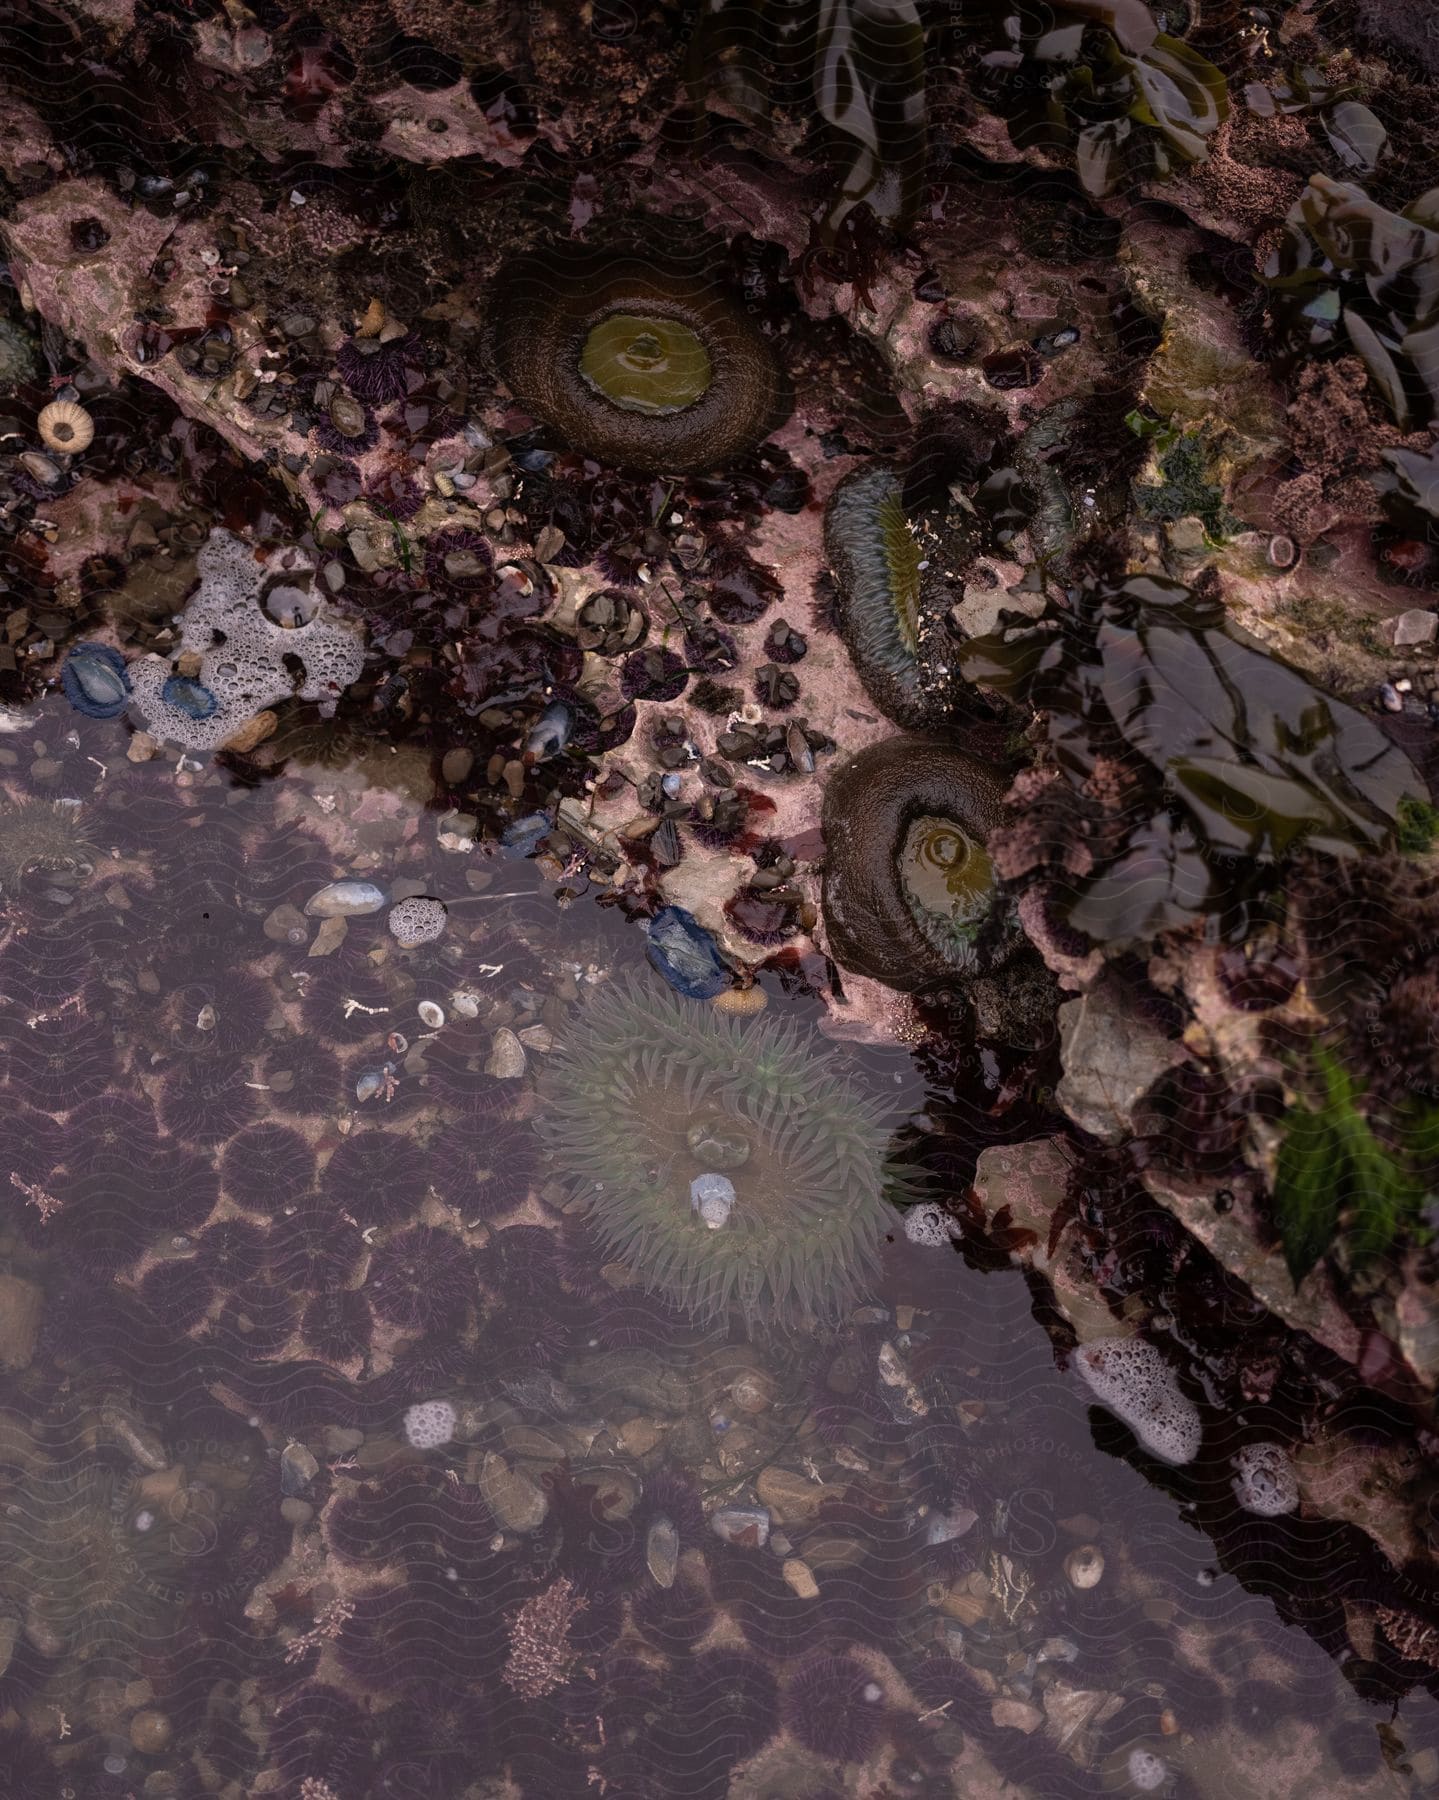 A tide pool filled with sea anemones and other marine life.